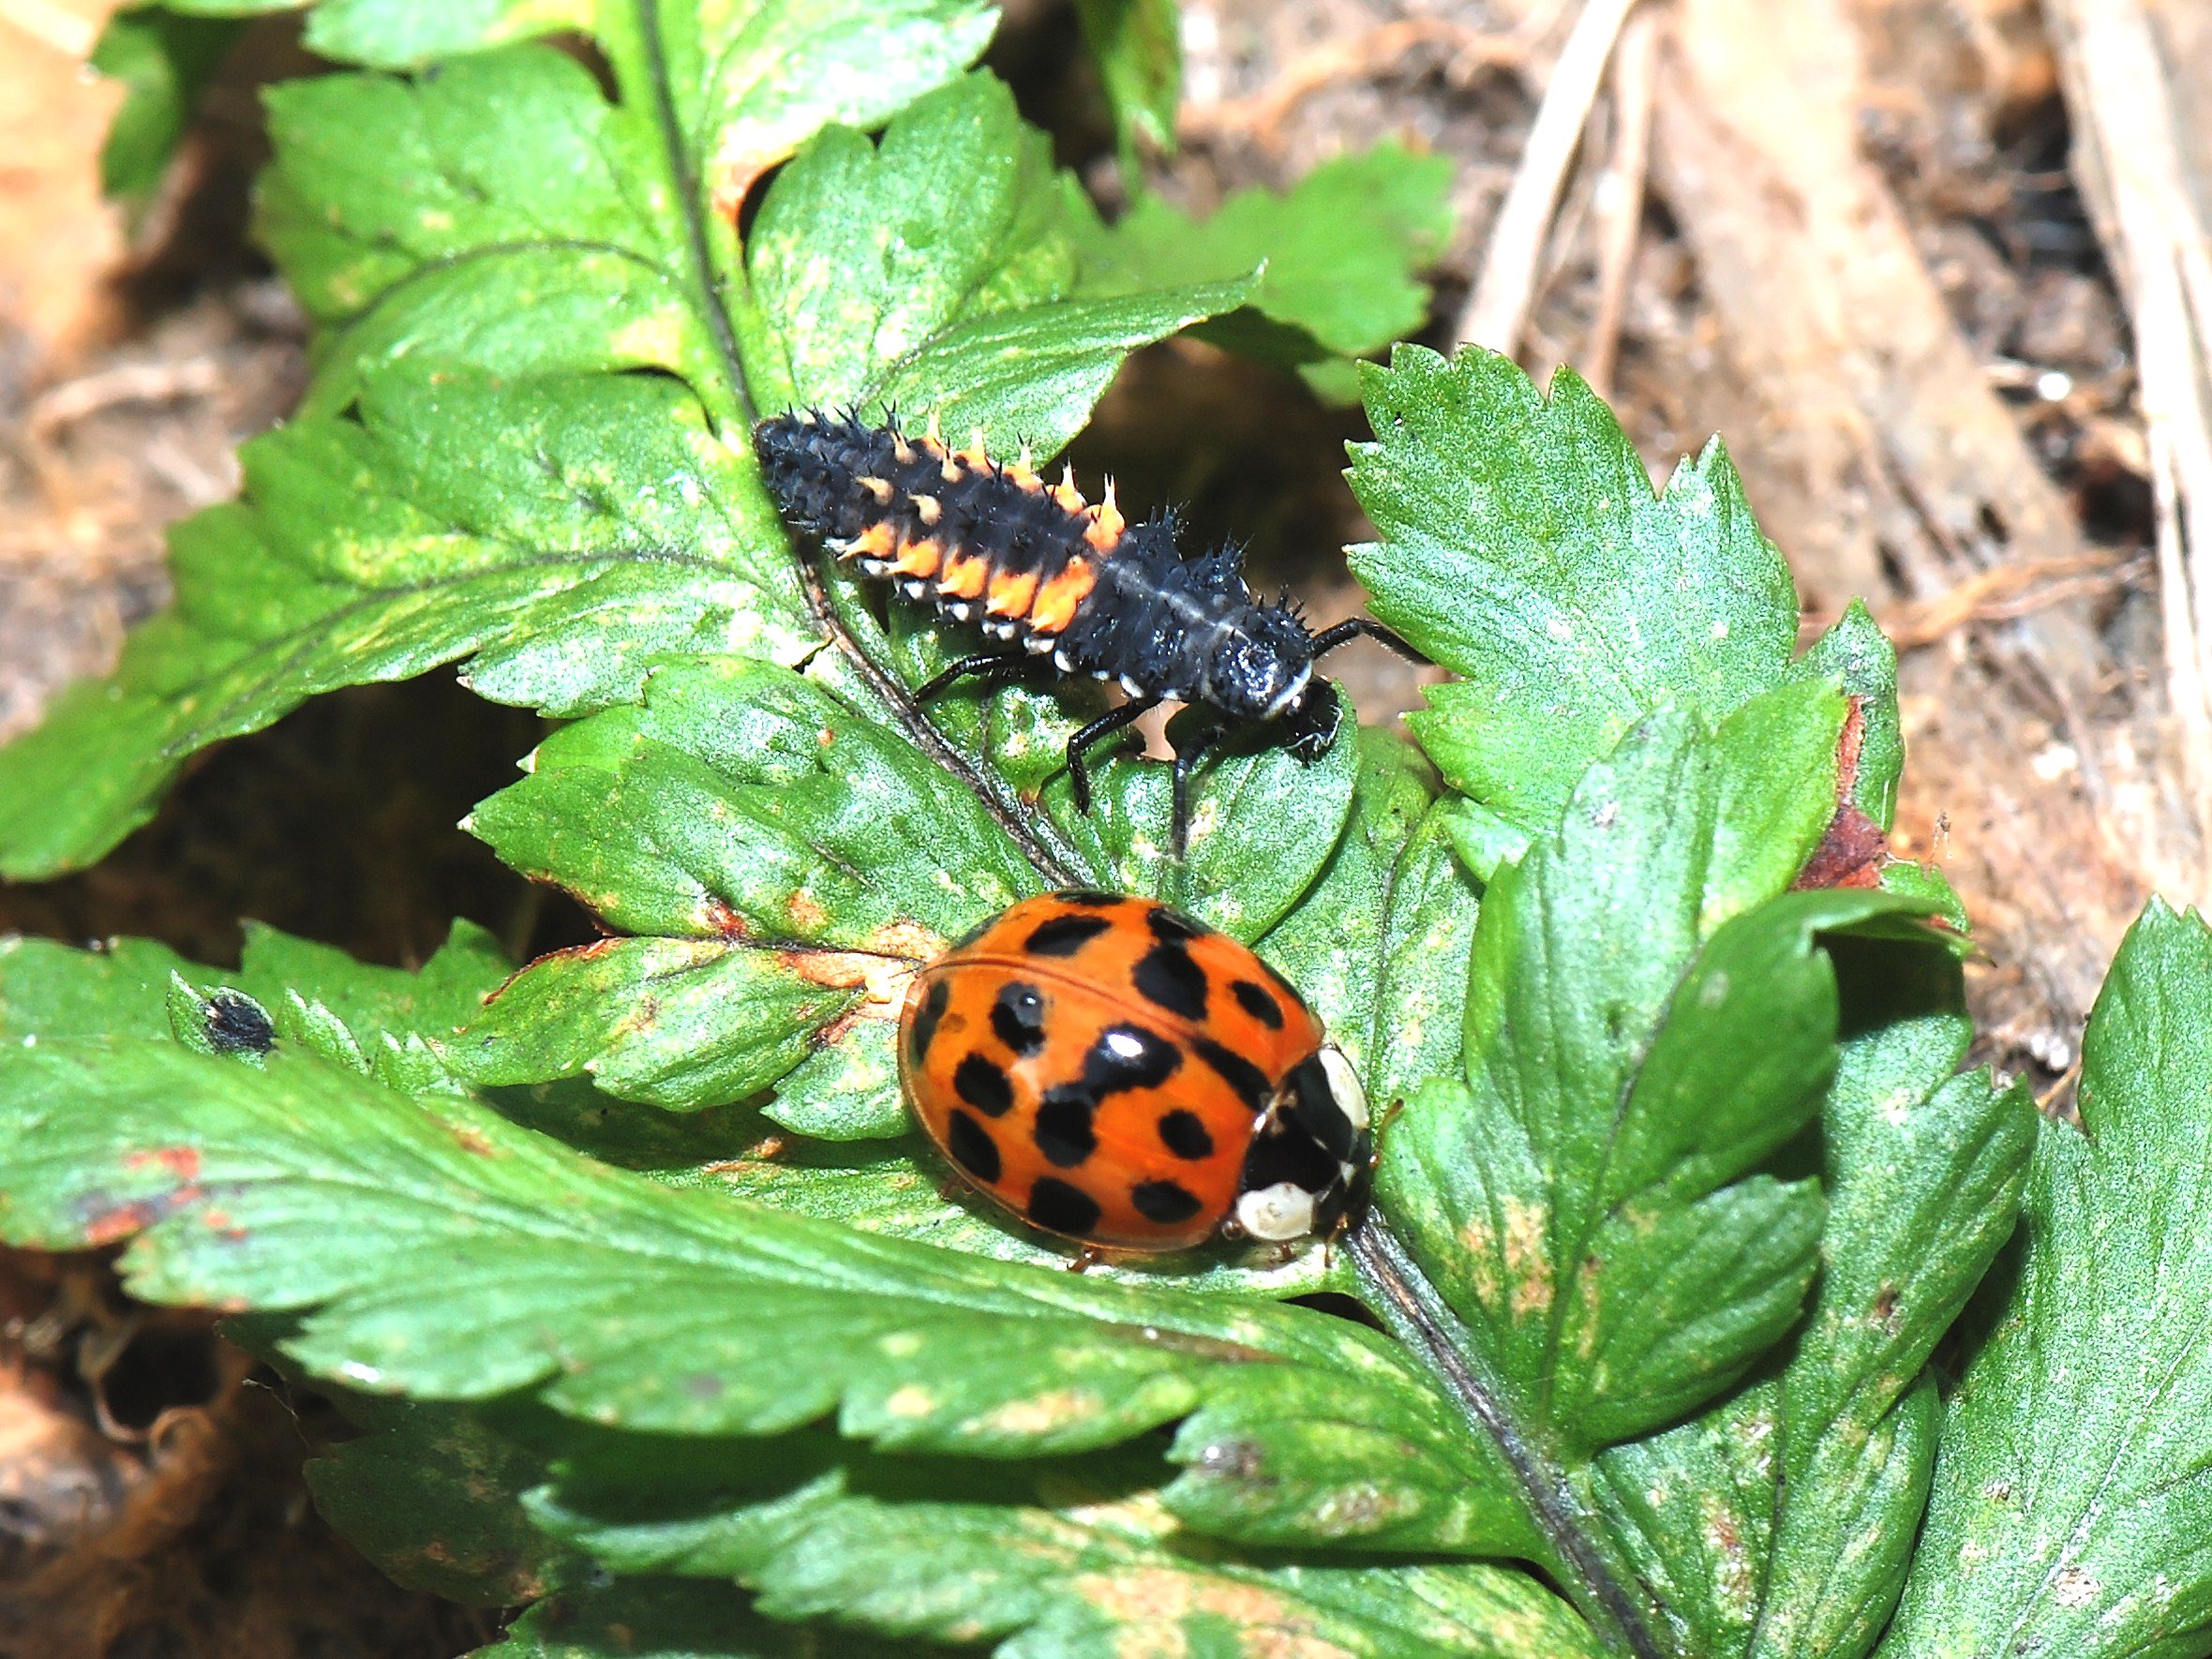 Harlequin and nymph